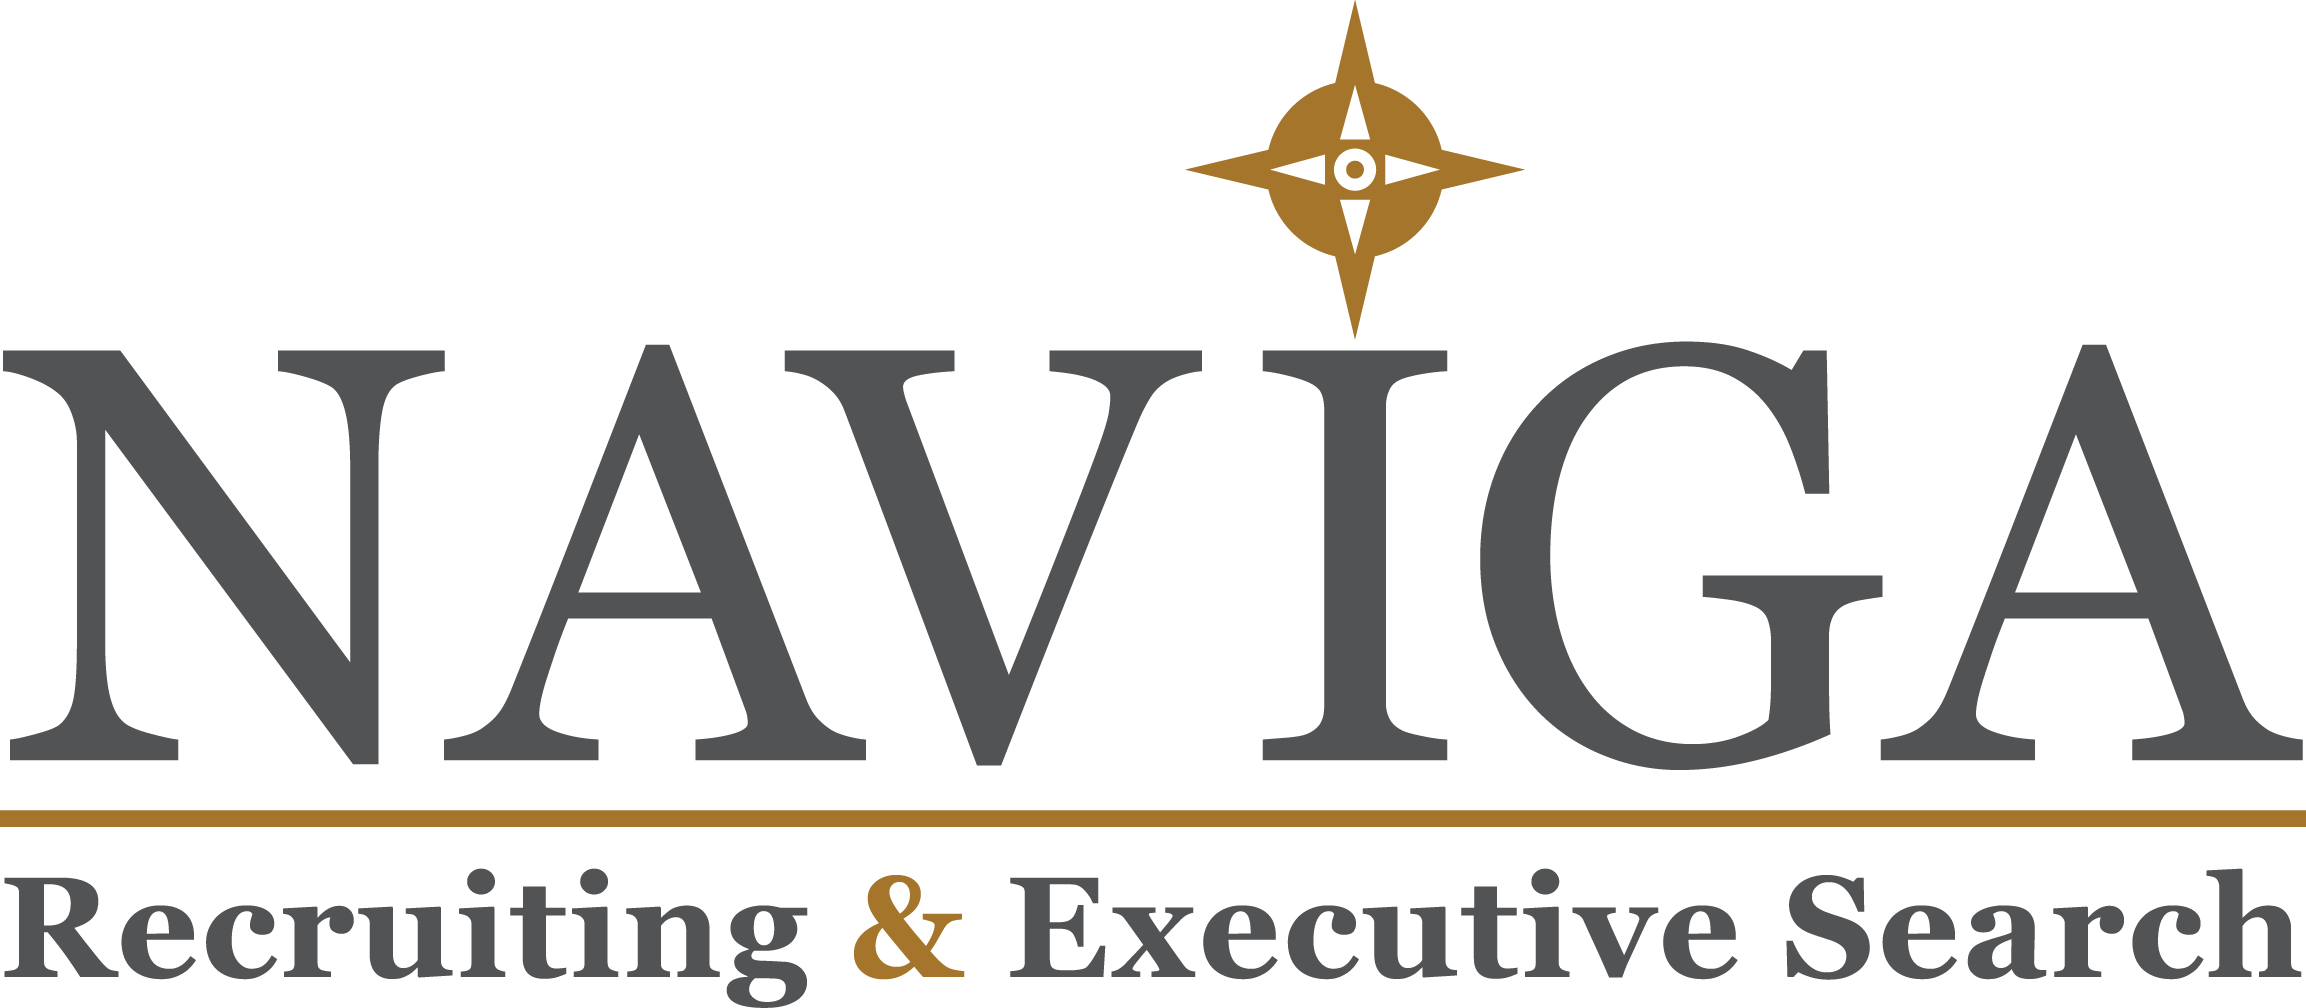 Naviga Recruiting & Executive Search profile on Qualified.One